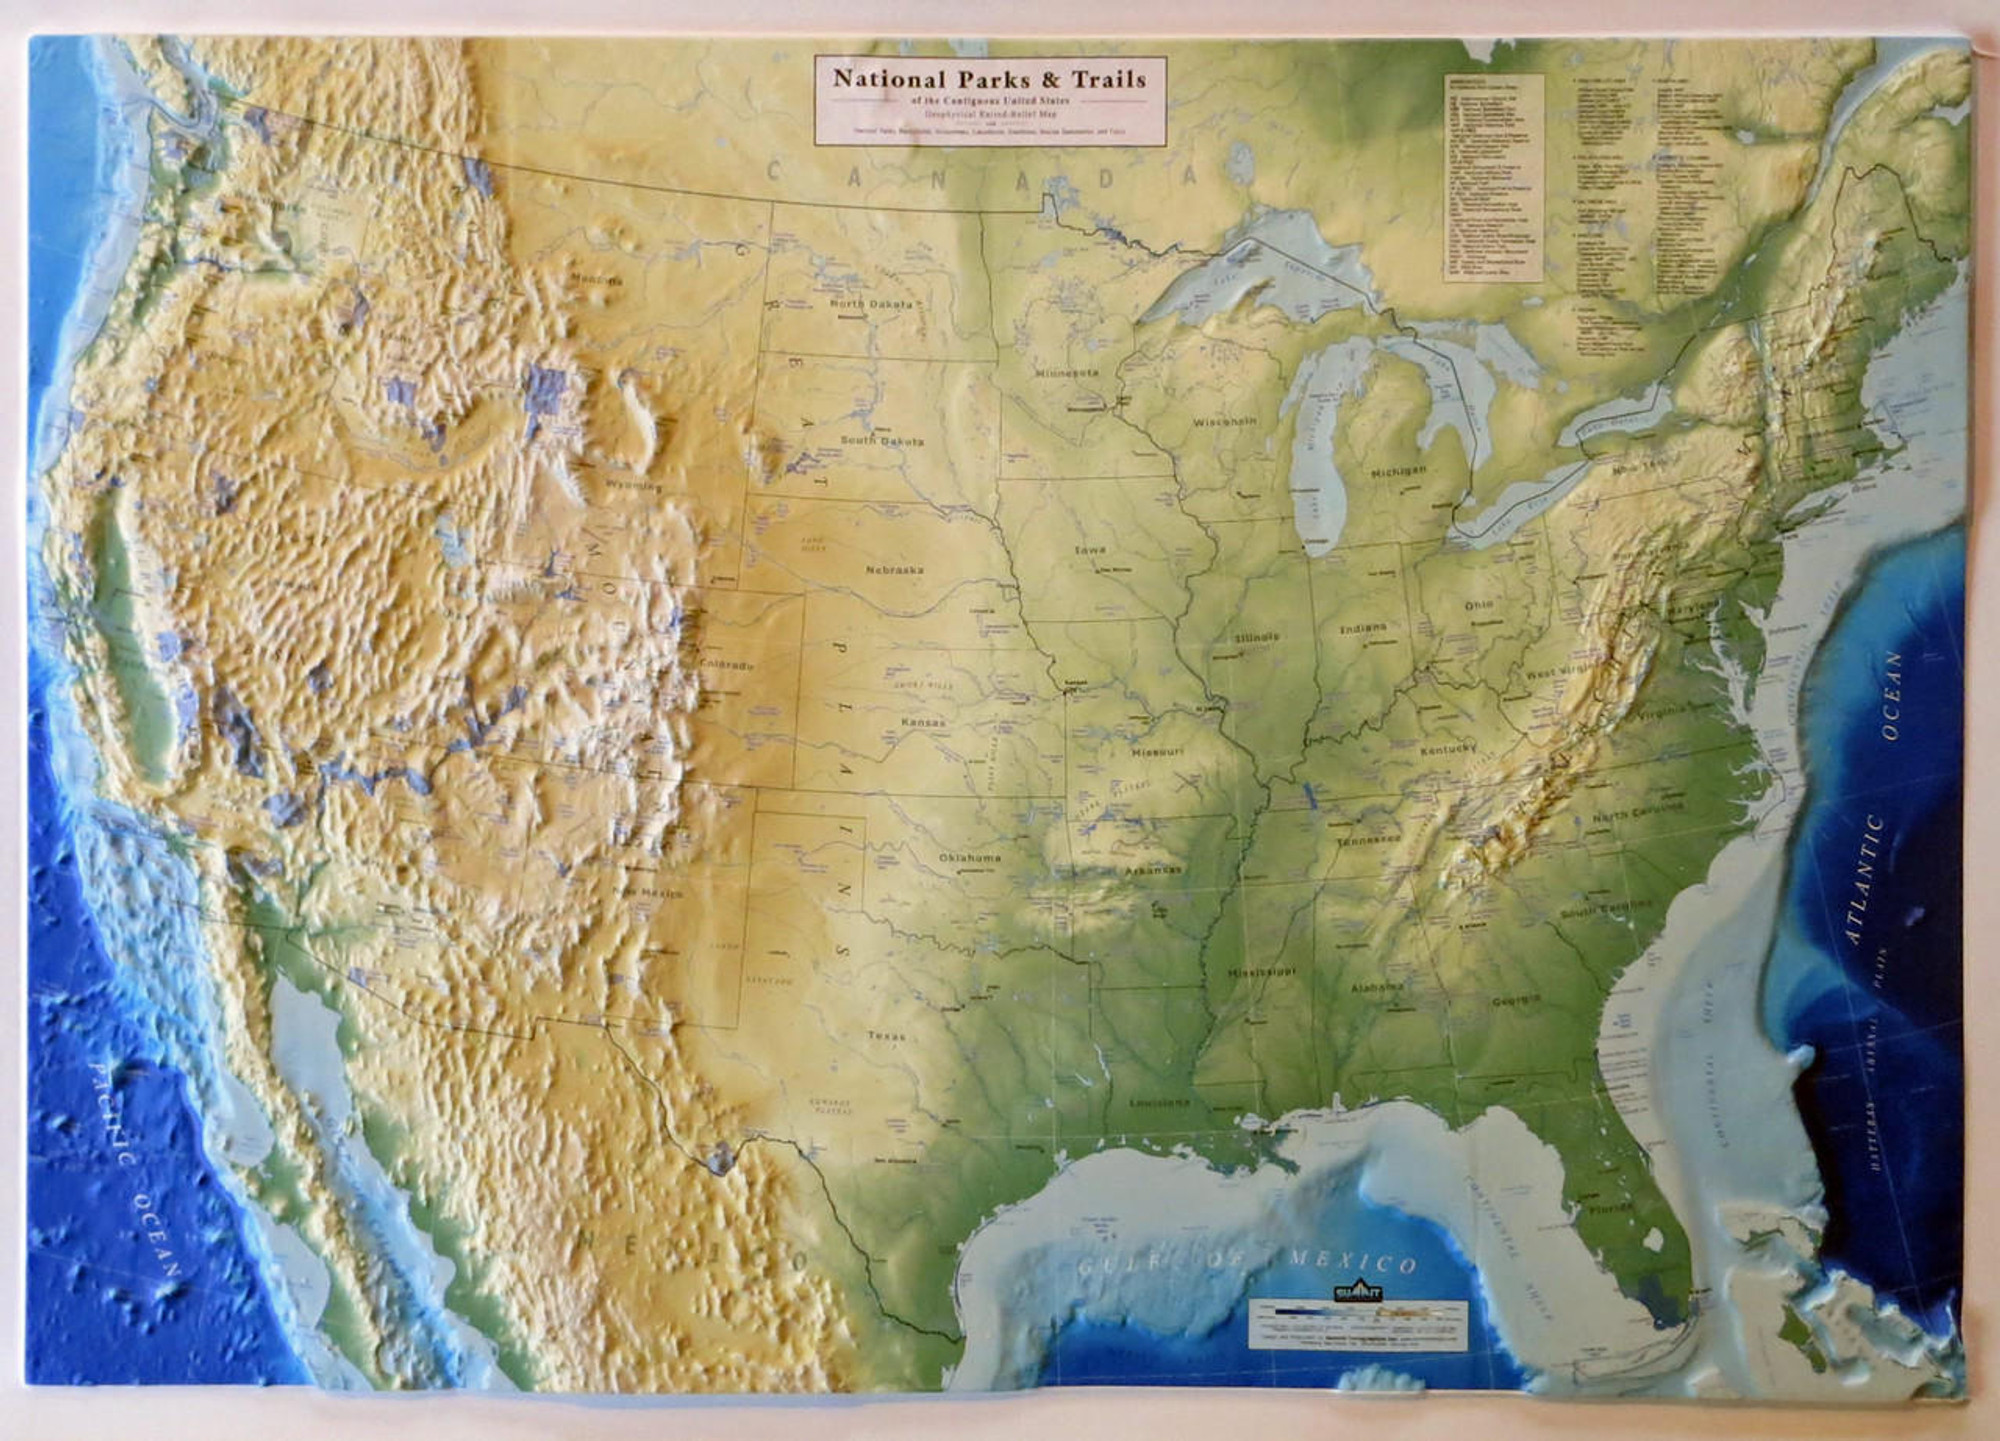 United States National Parks & Trails Raised Relief Map, image 1, World Maps Online